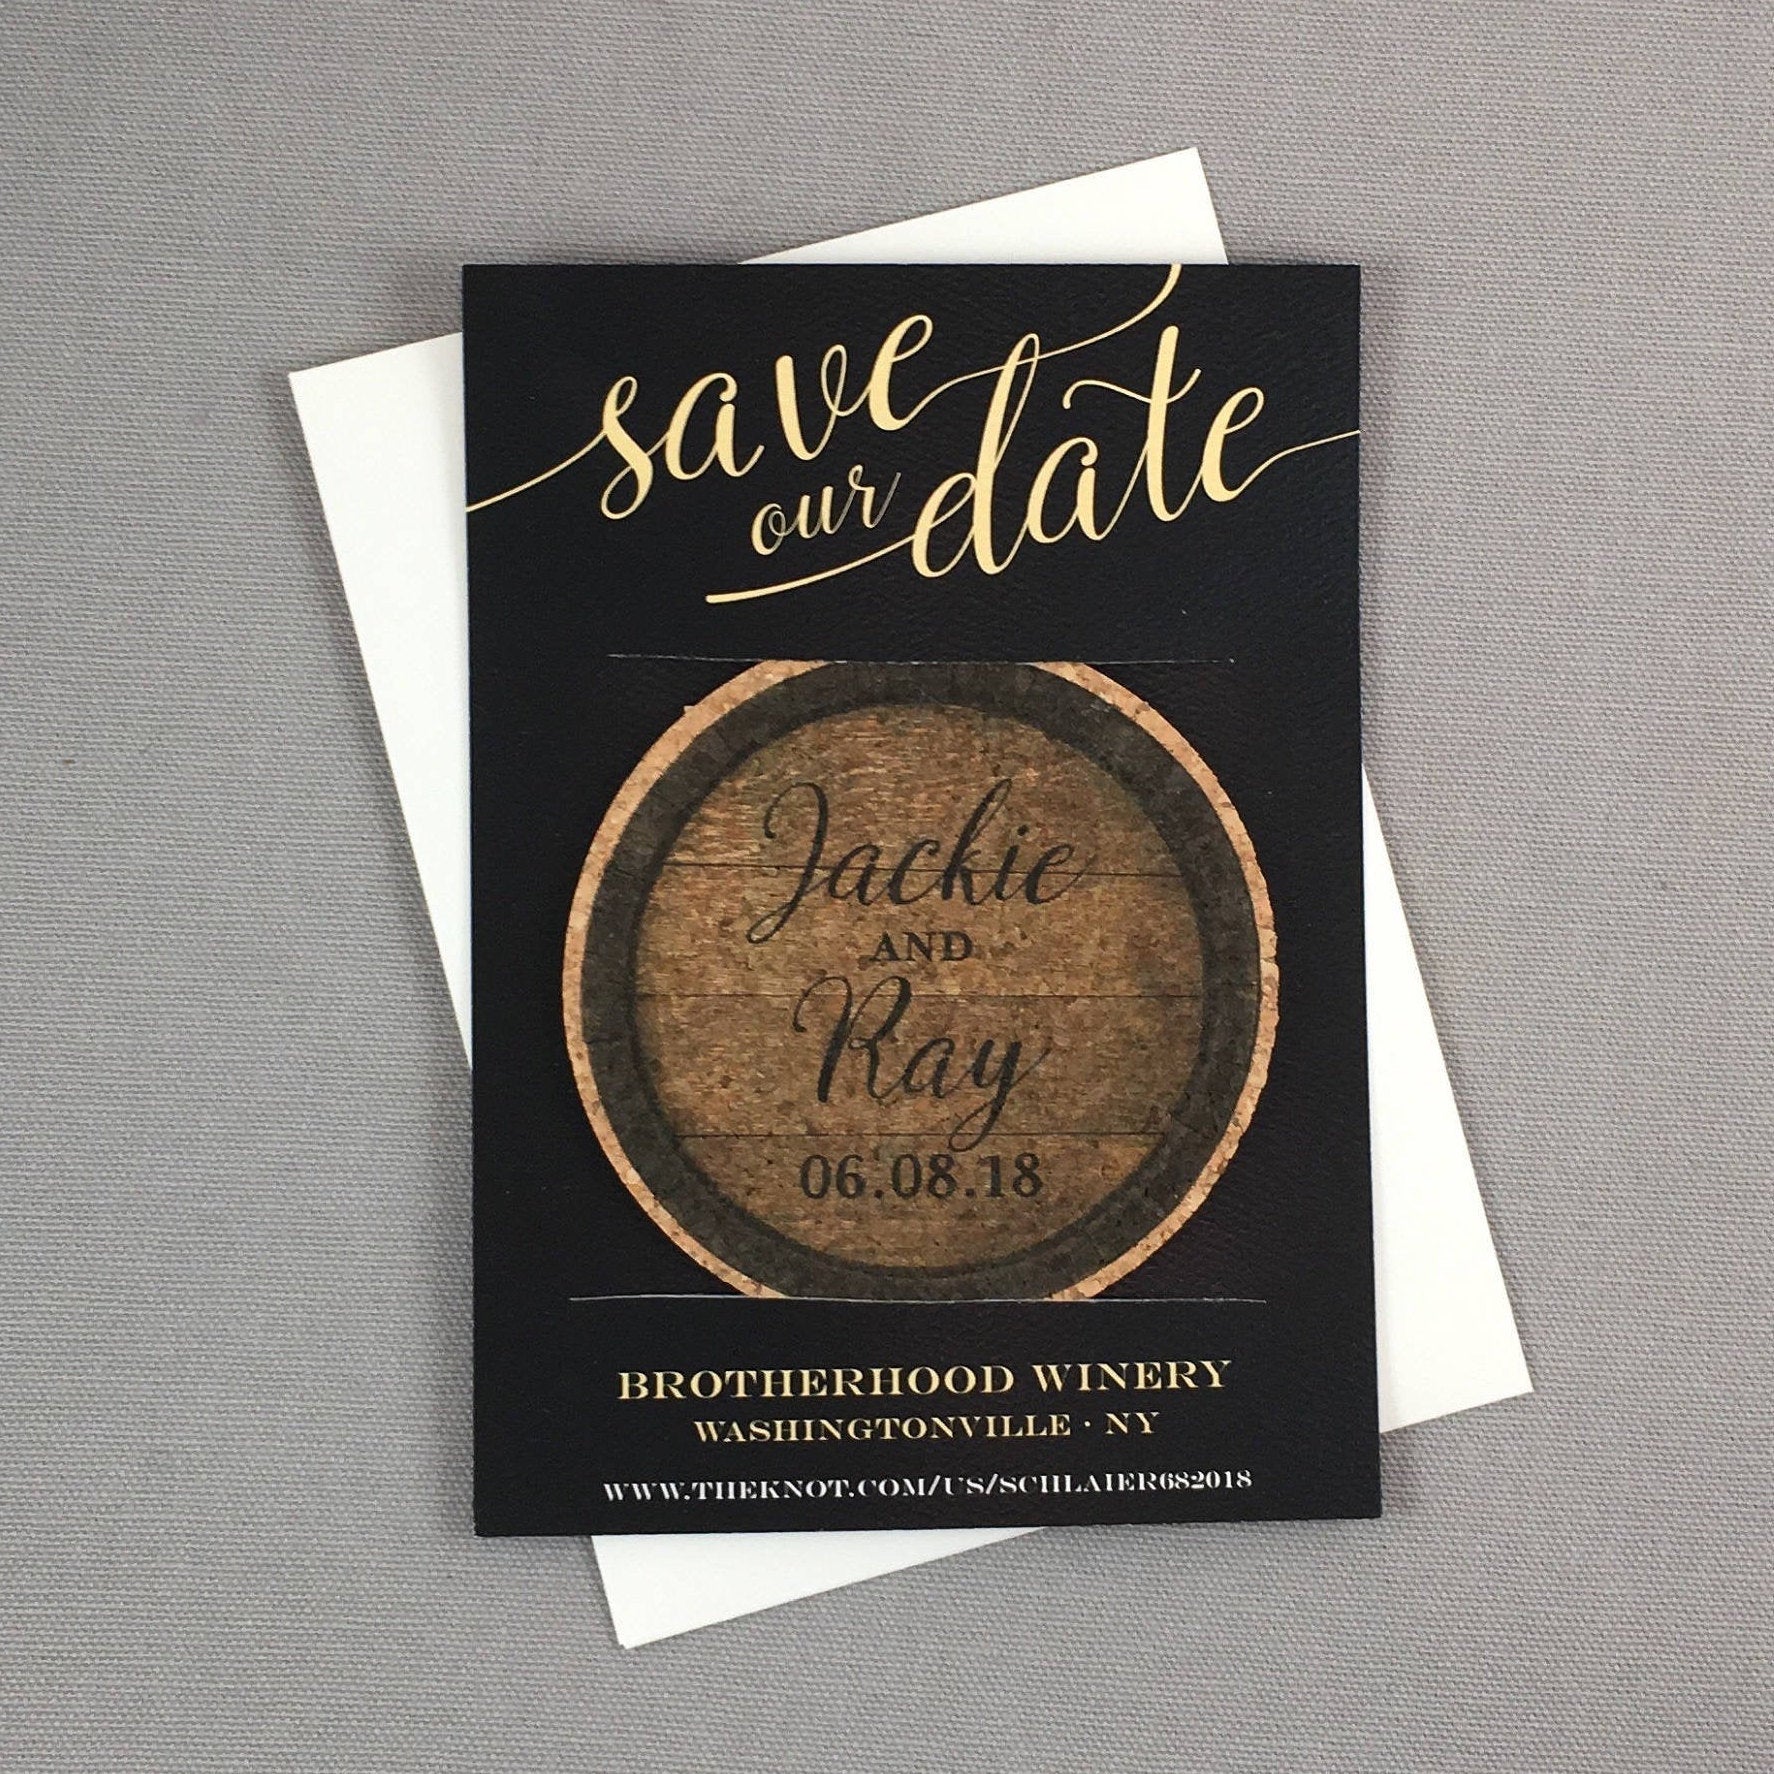 Vintage Wine Barrel Cork Coaster Save the Date with Photo and A7 Envelopes // Elegant Black and Gold Save the Date